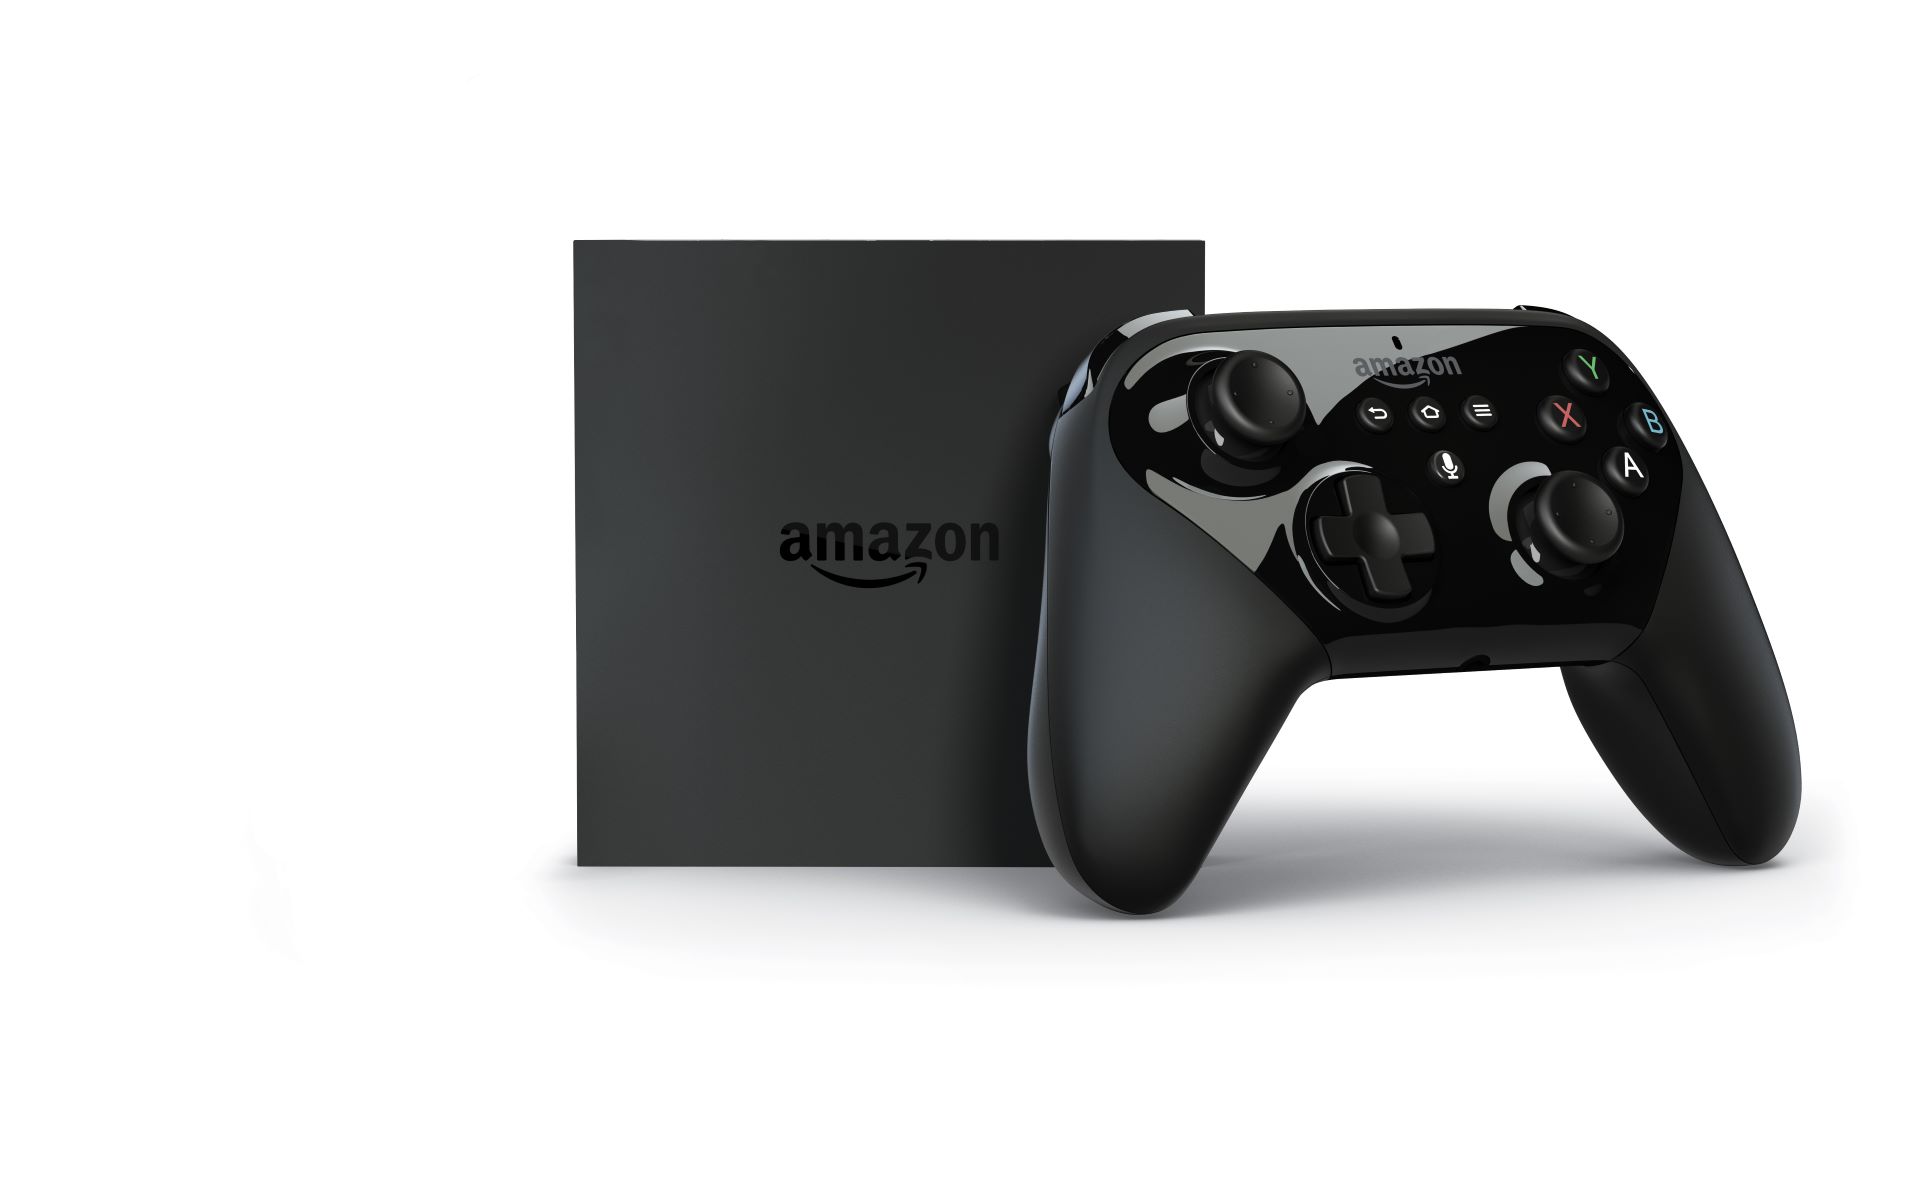 How To Use An Amazon Fire Game Controller